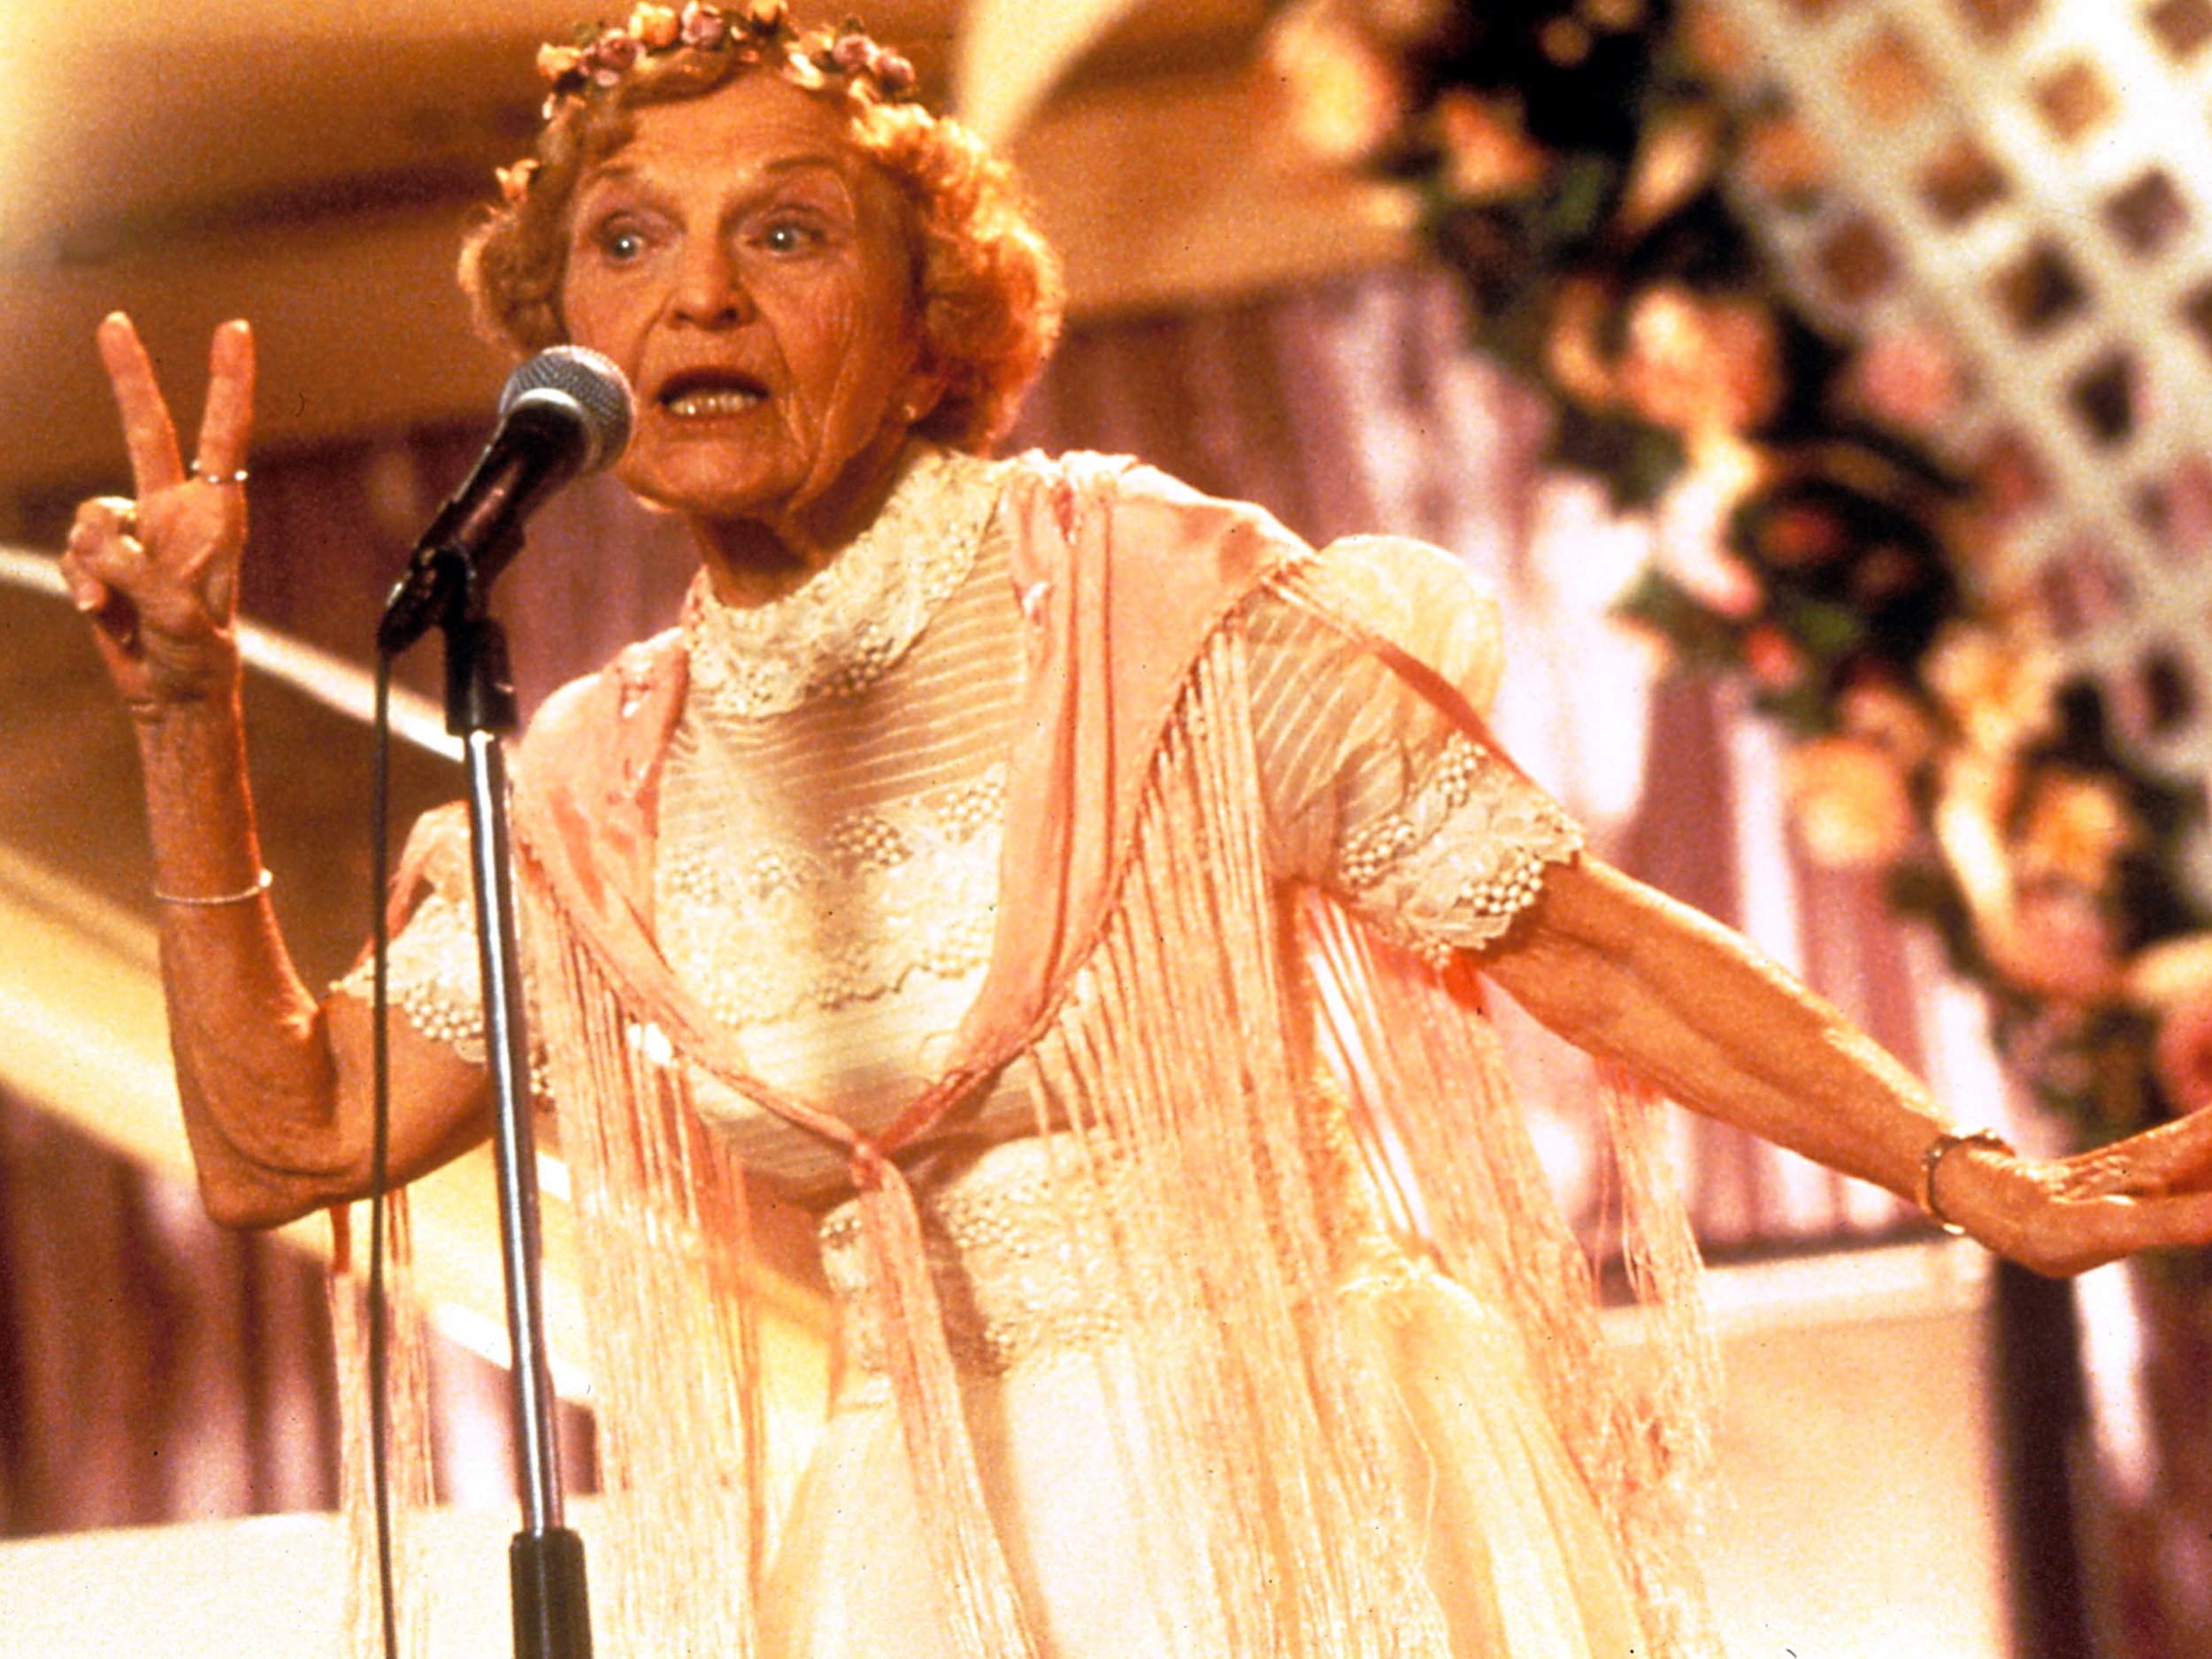 <p>She was the rapping granny that begat all rapping grannies. When Dow performed “Rapper’s Delight” in <em>The Wedding Singer</em>, it was the birth of an unexpected trope. Of course, Dow had plenty of other roles in her 101 years of life, but that rap is her legacy.</p><p>You may also like: <a href='https://www.yardbarker.com/entertainment/articles/20_screen_adaptations_that_did_the_book_justice_110923/s1__39471205'>20 screen adaptations that did the book justice</a></p>